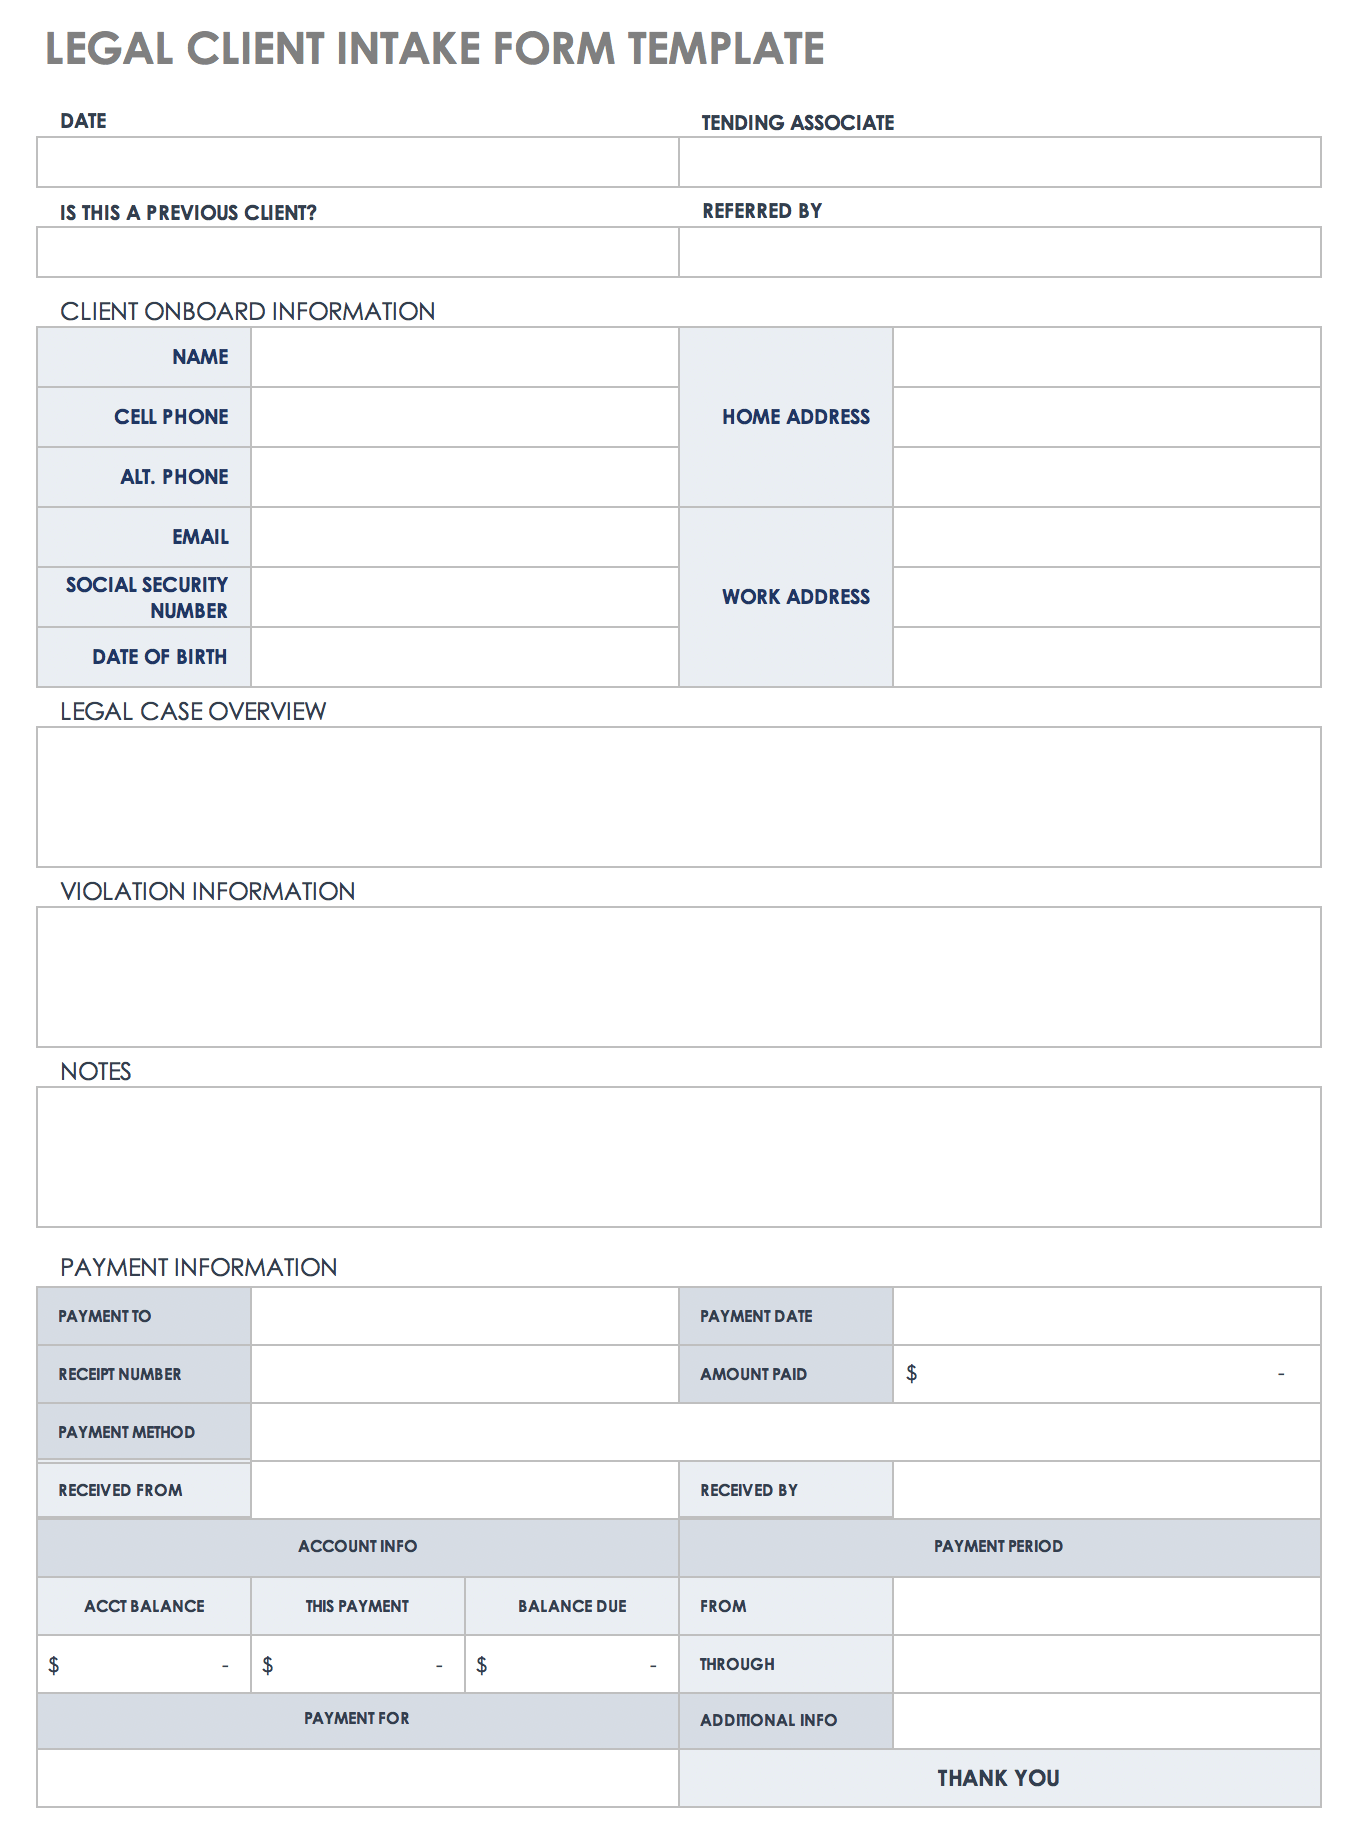 Legal Client Intake Form Template